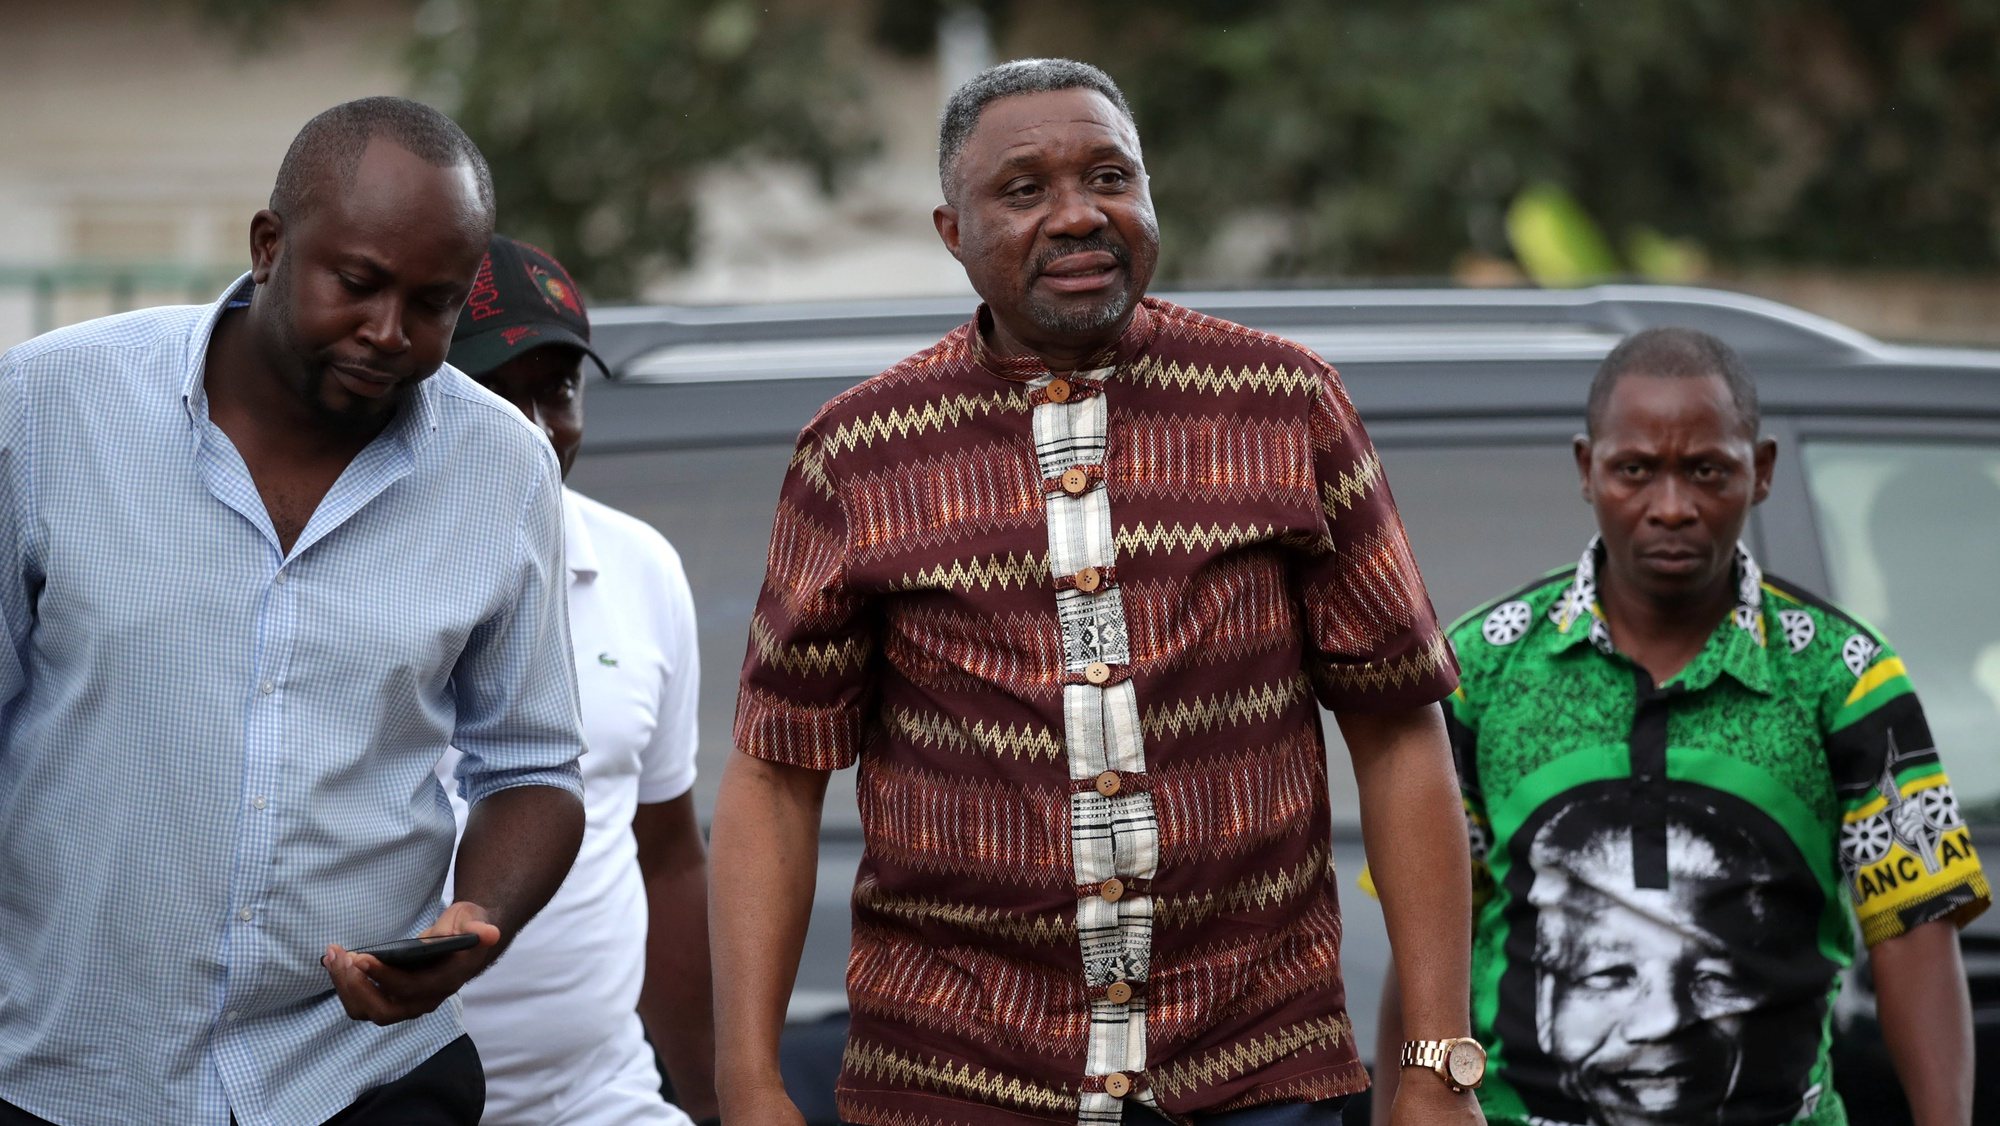 epa10205565 Prime minister of Sao Tome and Principe, Jorge Bom Jesus (C), leader of the MLSTP/PSD party, arrives to vote in the legislative, regional and municipal elections, at 1 de Junho school, in Sao Tome and Principe, 25 September 2022.  More than 120 thousand voters were expected to cast their ballots in over 30 polling stations distributed throughout the national territory and abroad.  EPA/ESTELA SILVA